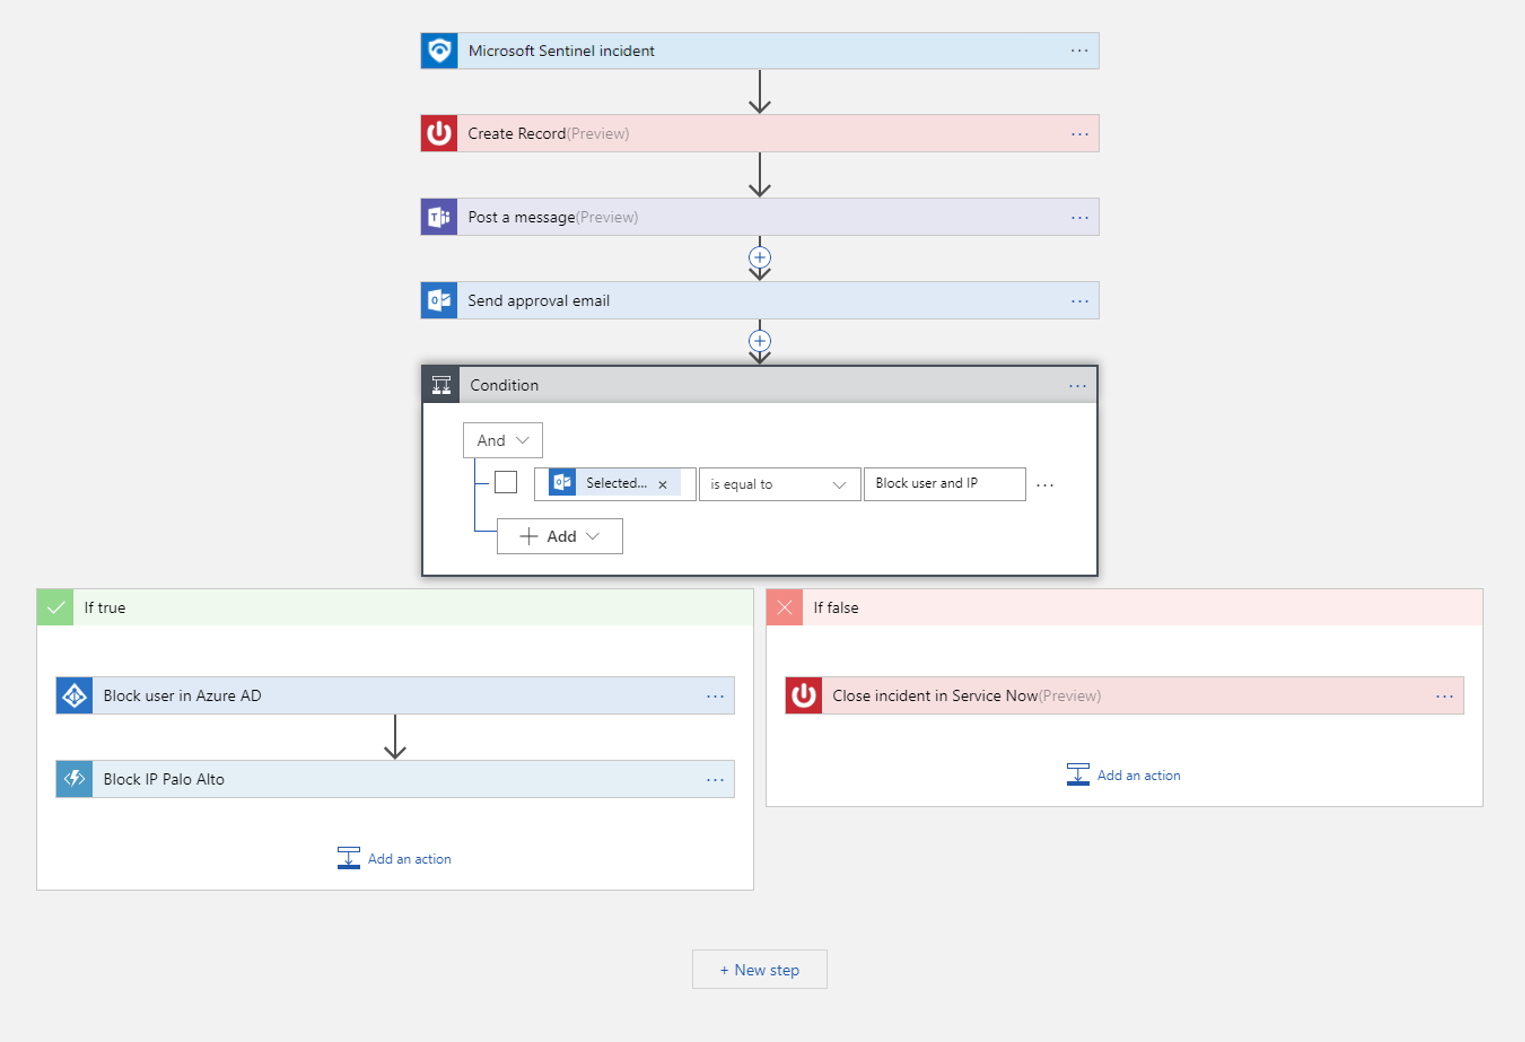 Screenshot showing the Logic App designer with an incident trigger workflow.